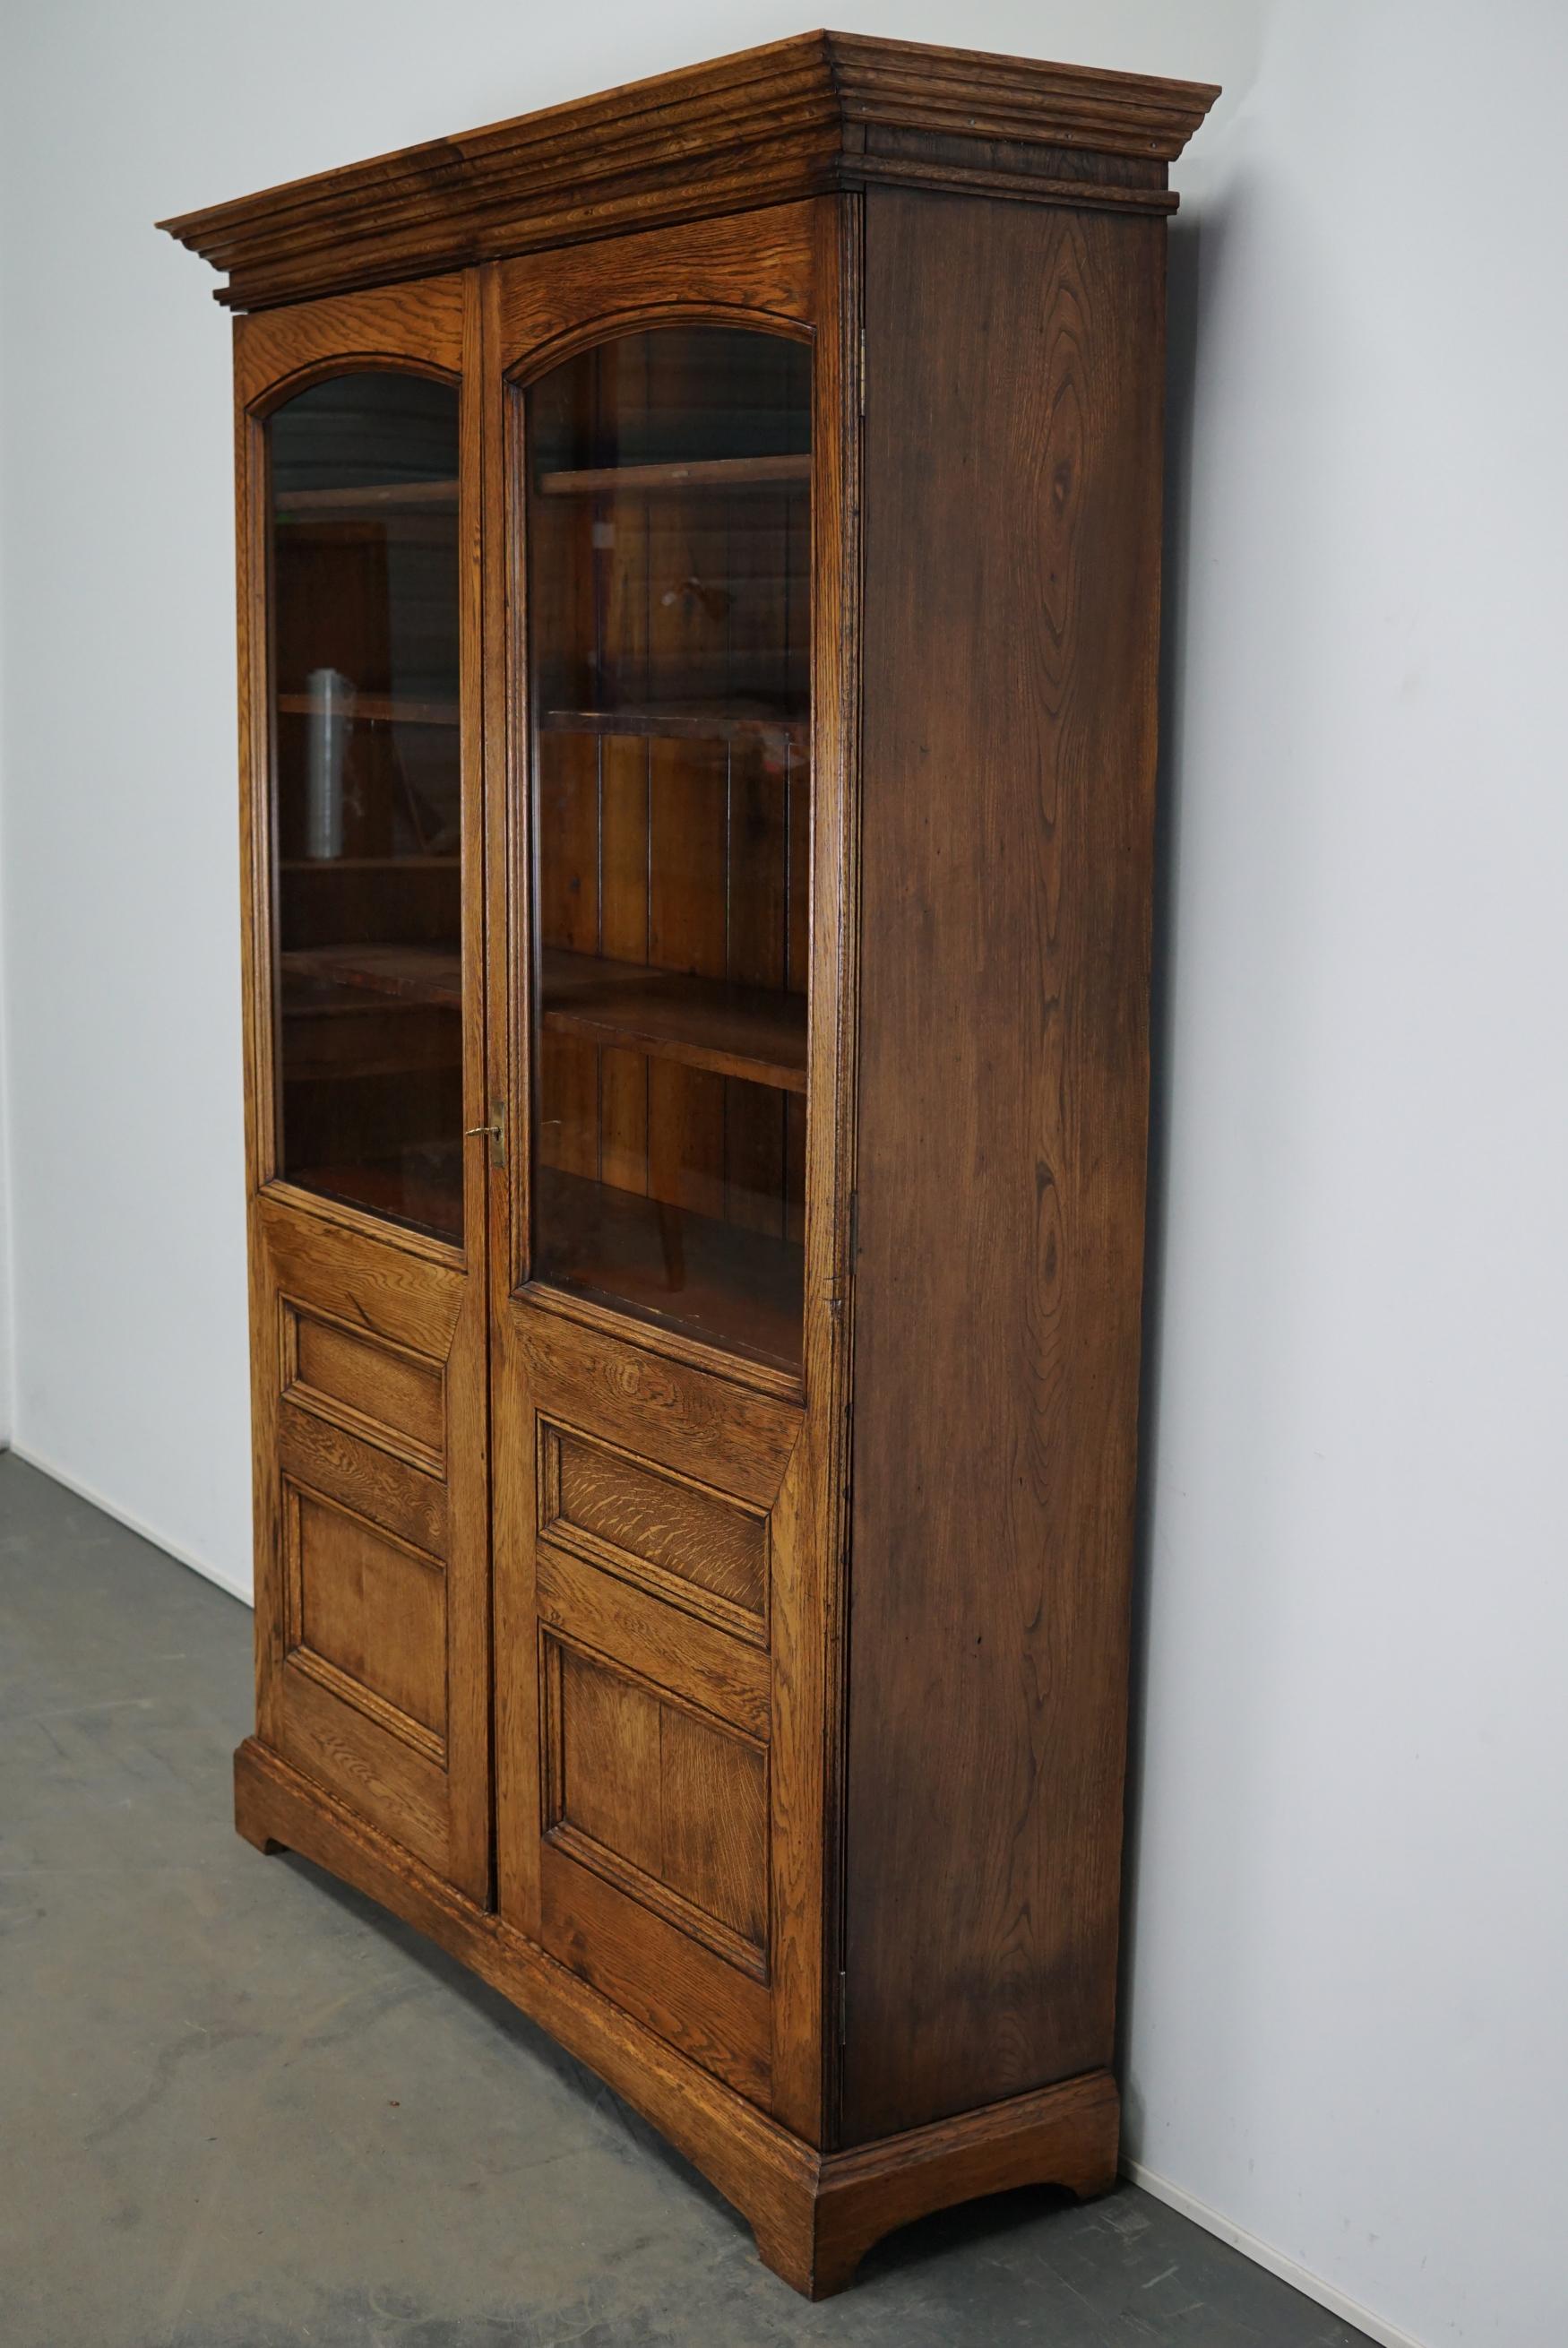 This bookcase was made from oak circa 1870s in England. It features two doors with a nice original key and lock. It remains in an amazing restored antique condition. The oak and six pine shelves / back on the inside have retained a beautiful patina